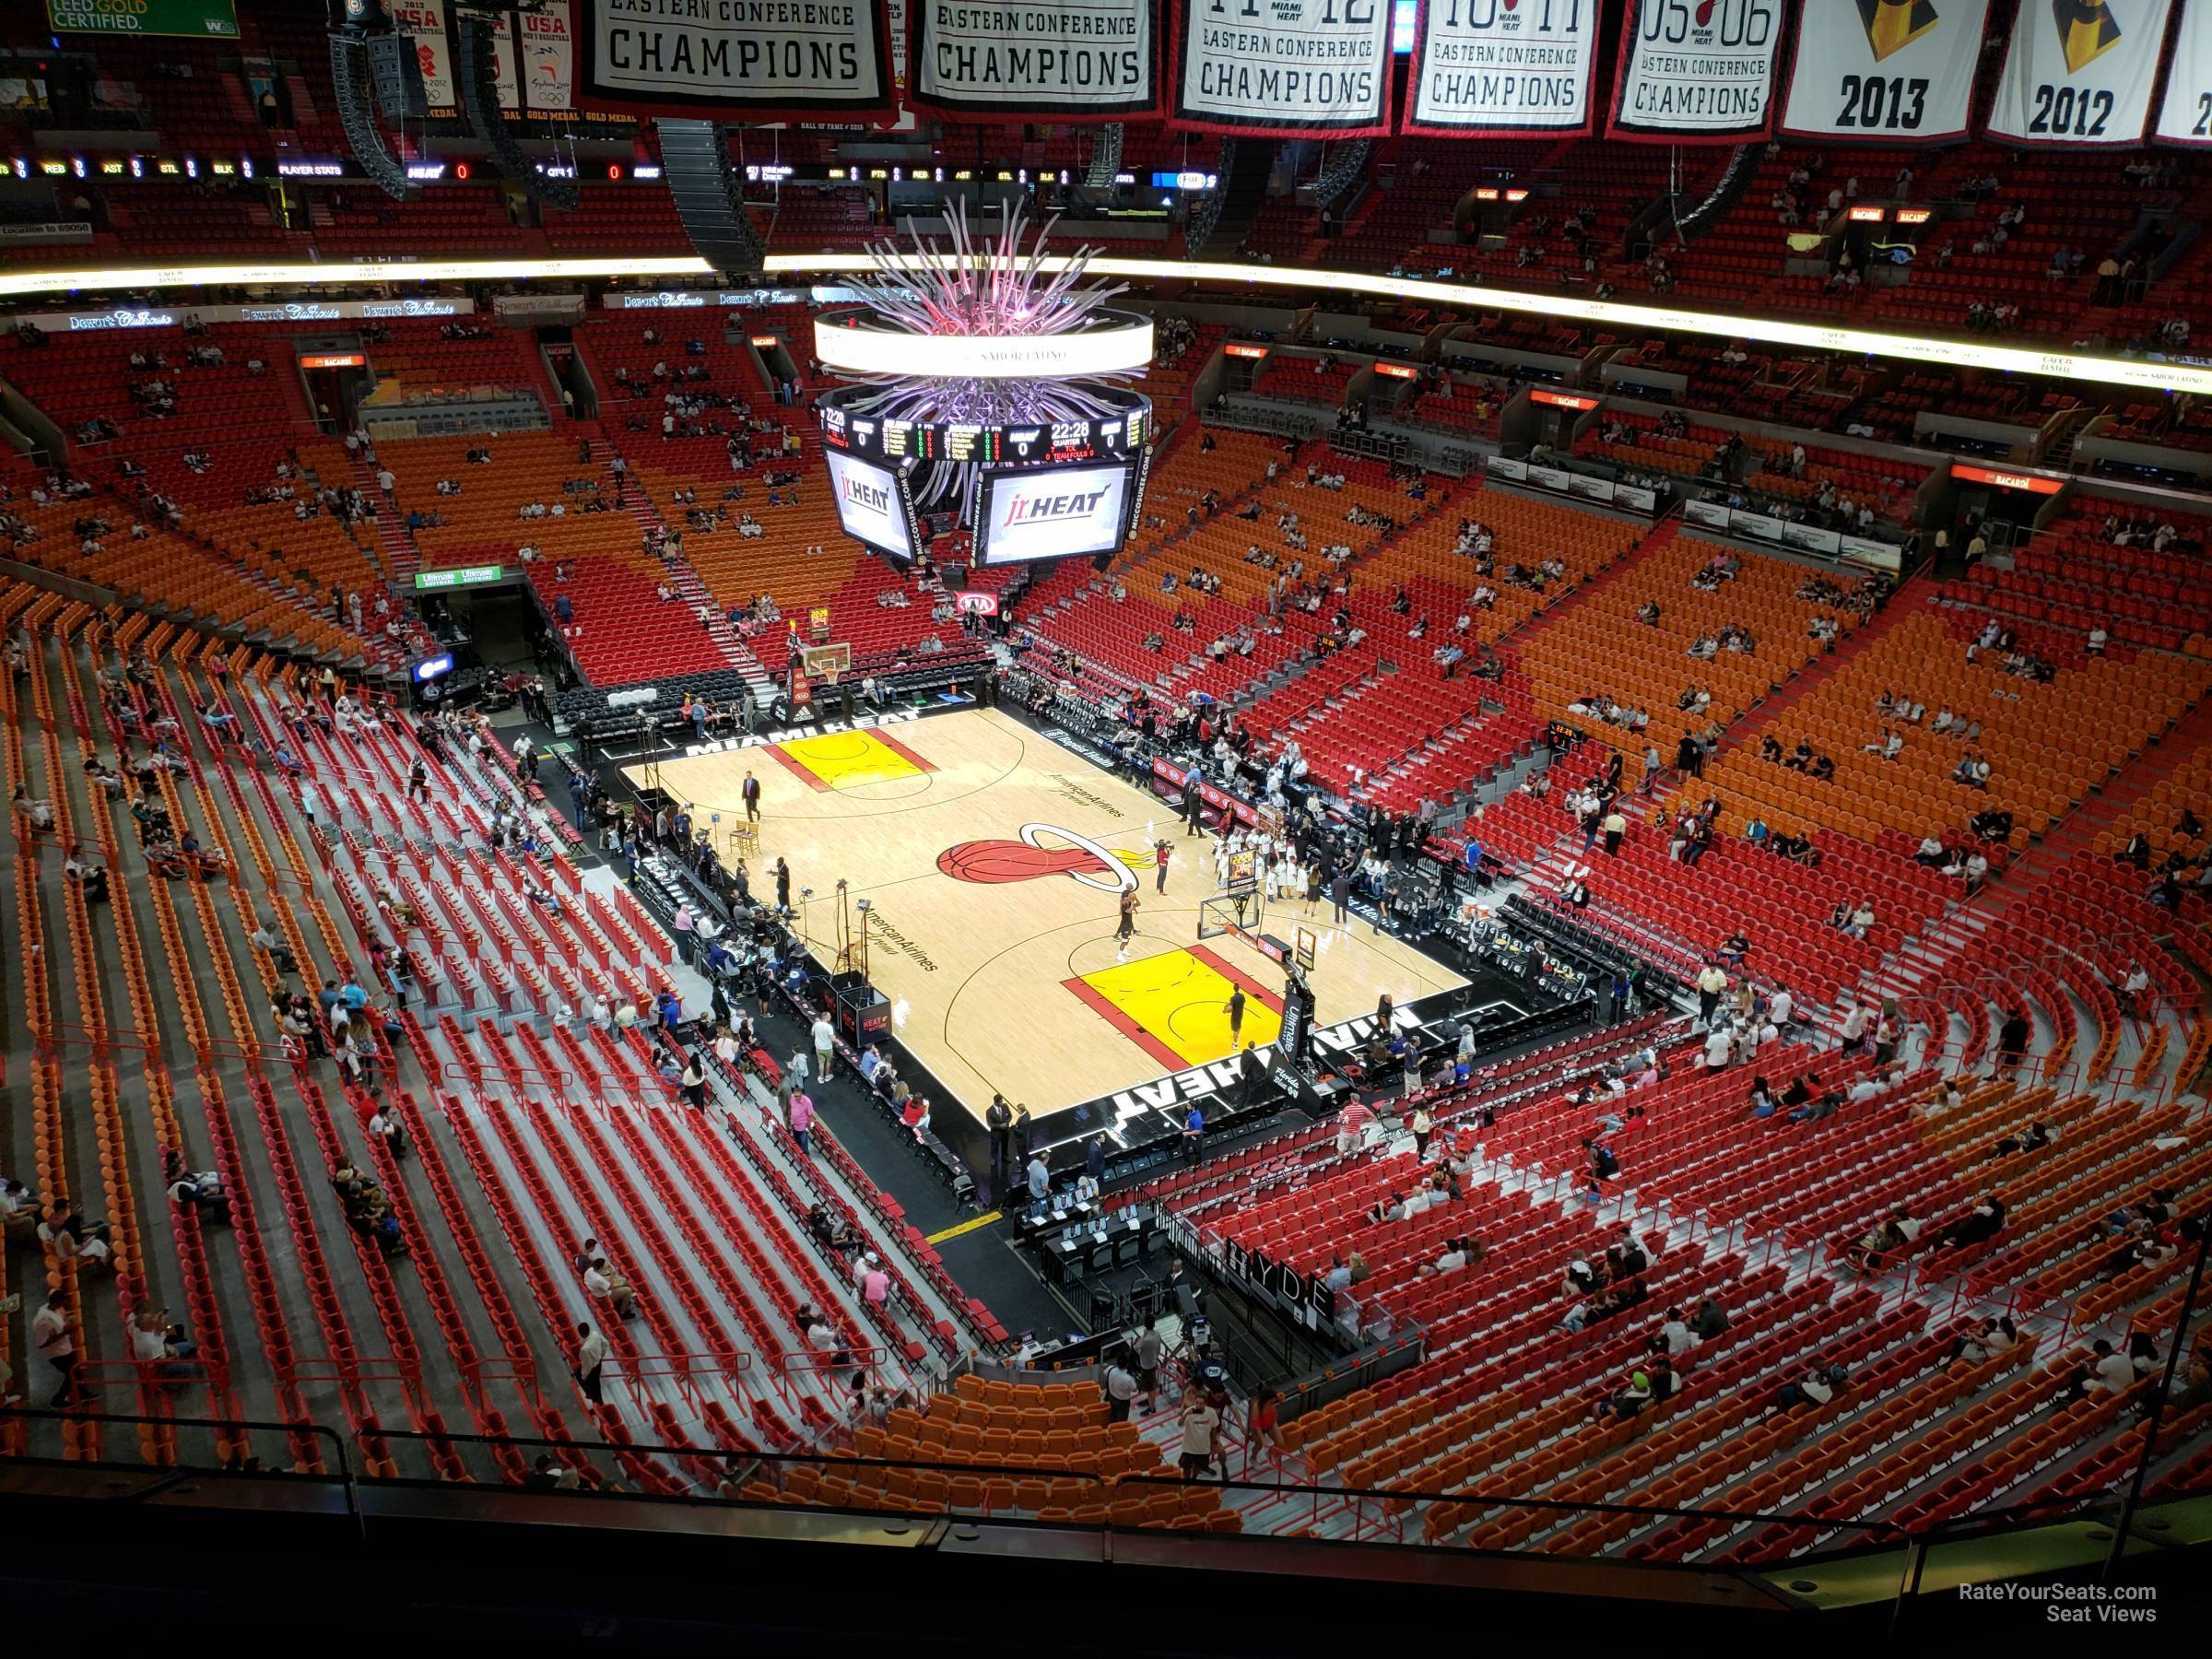 section 417, row 6 seat view  for basketball - miami-dade arena